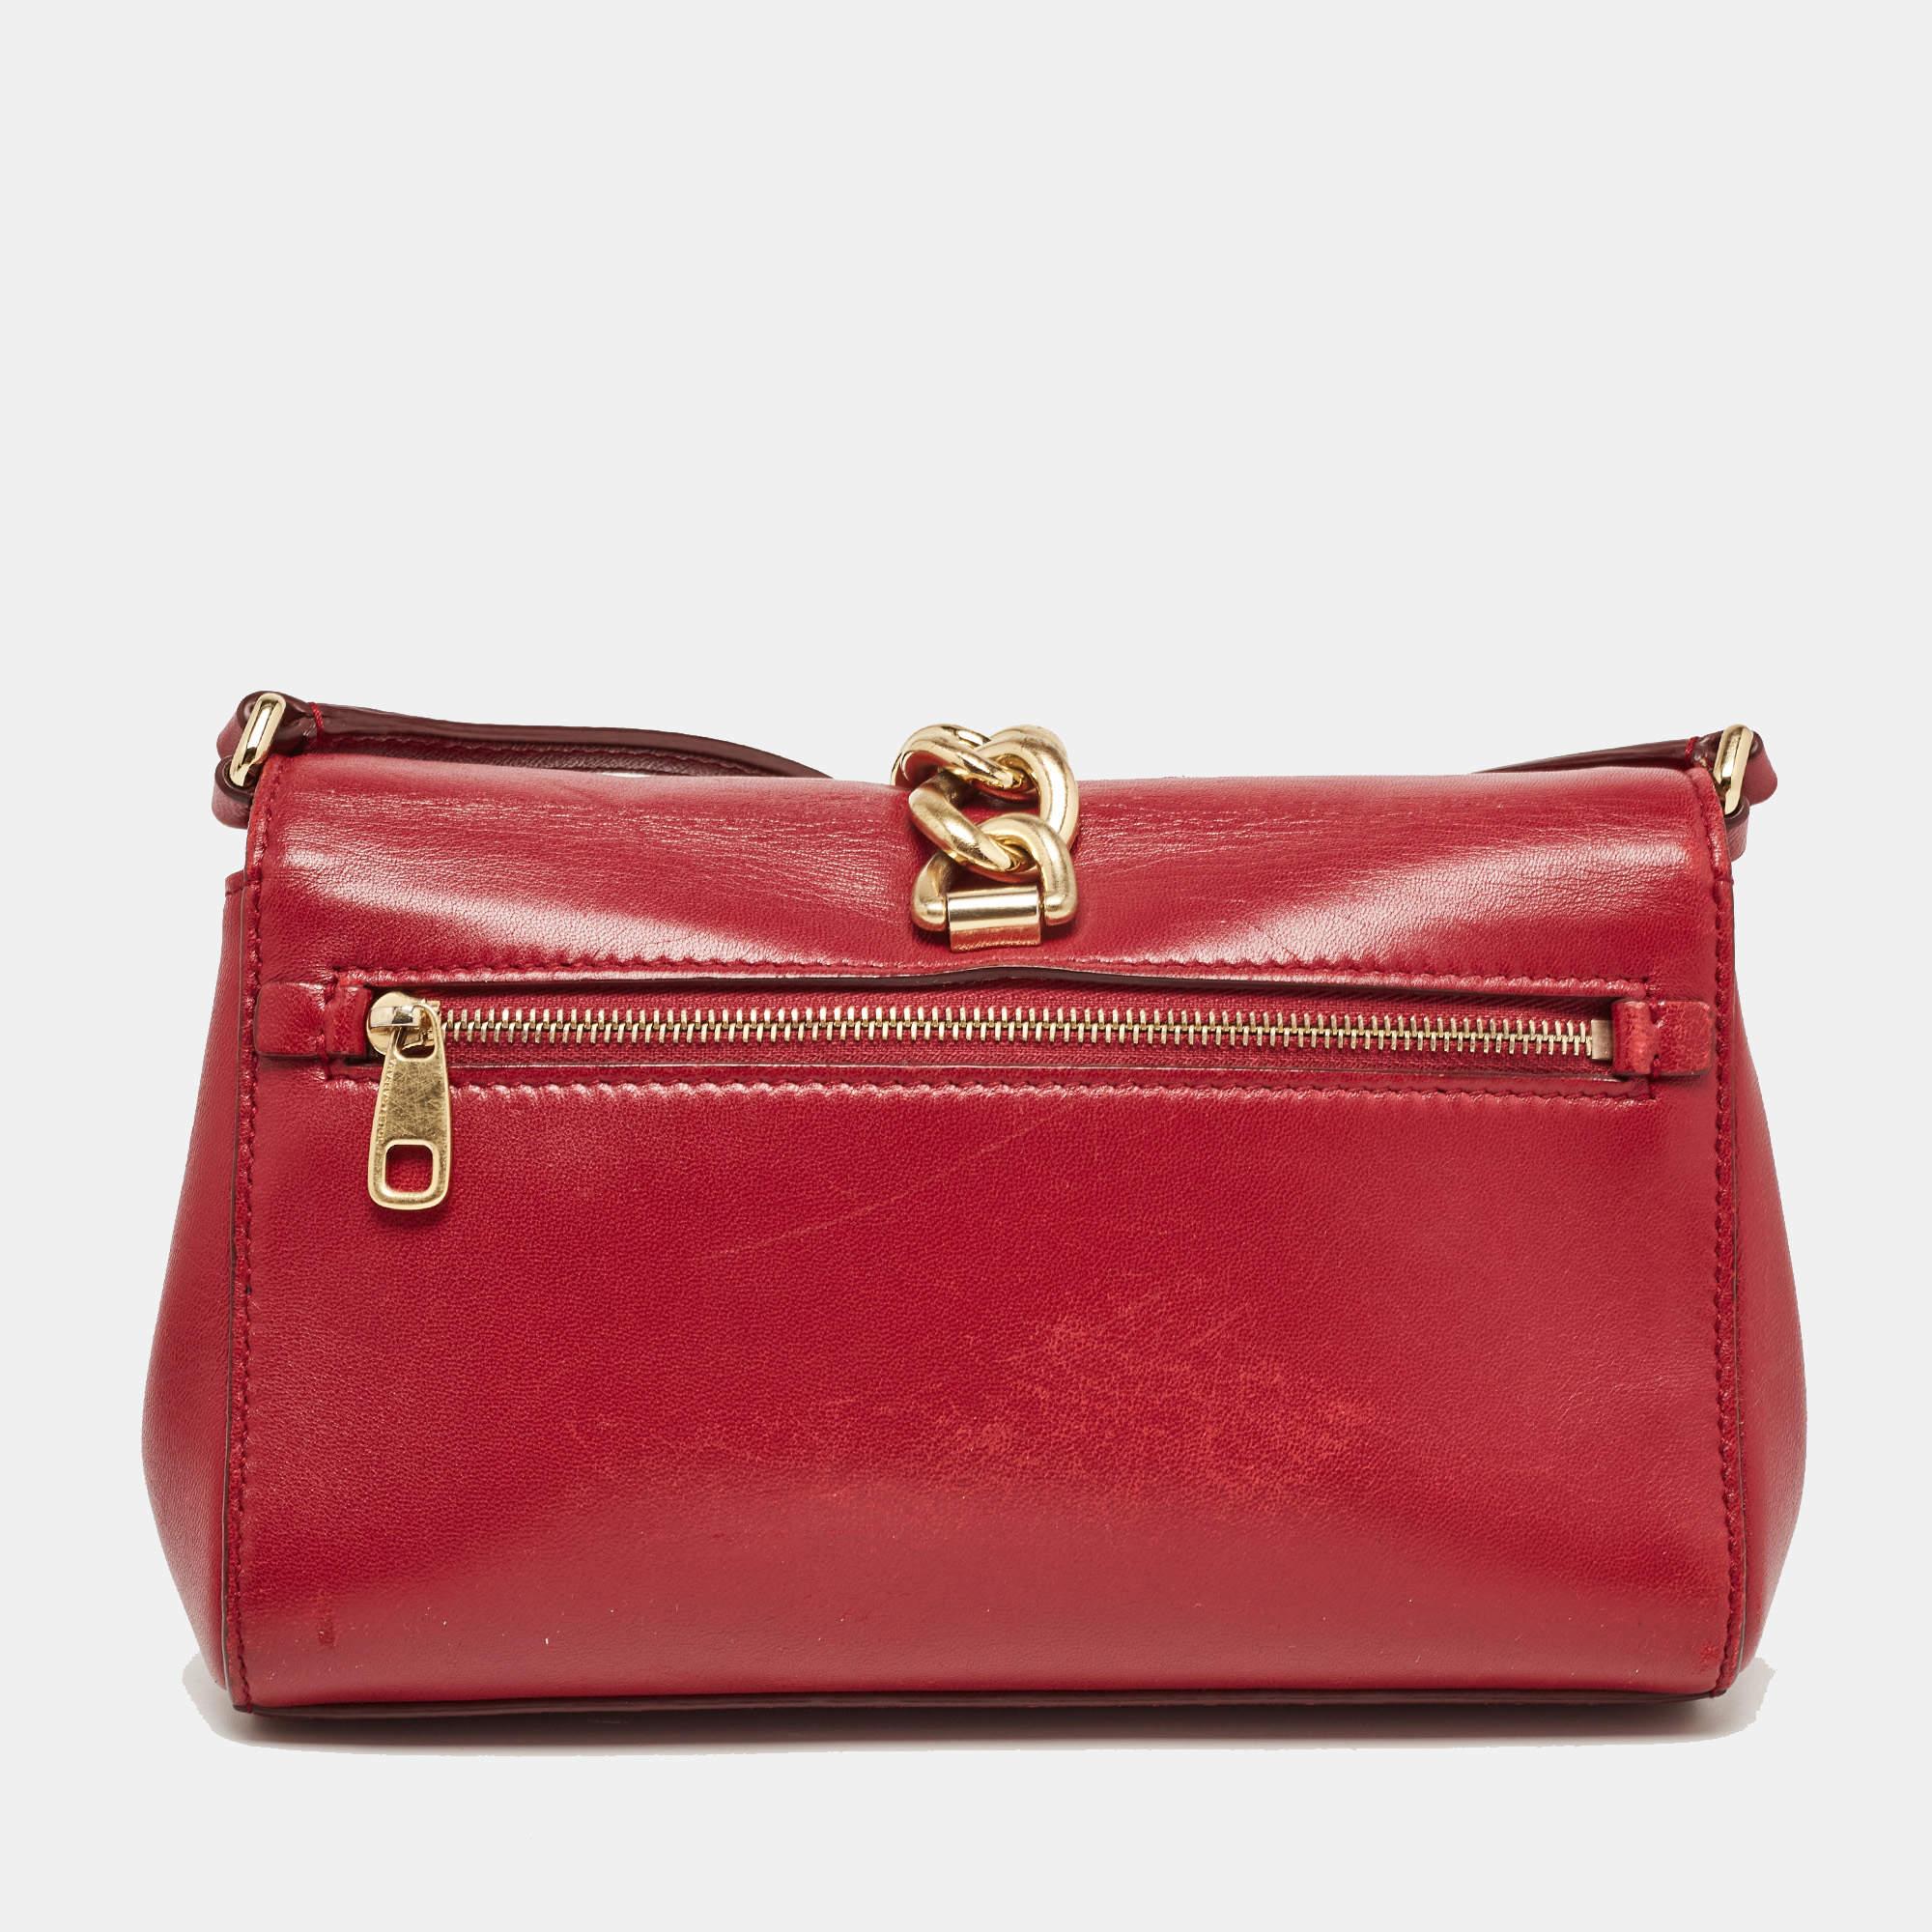 Dolce & Gabbana Red Leather Padlock Flap Crossbody Bag For Sale 7